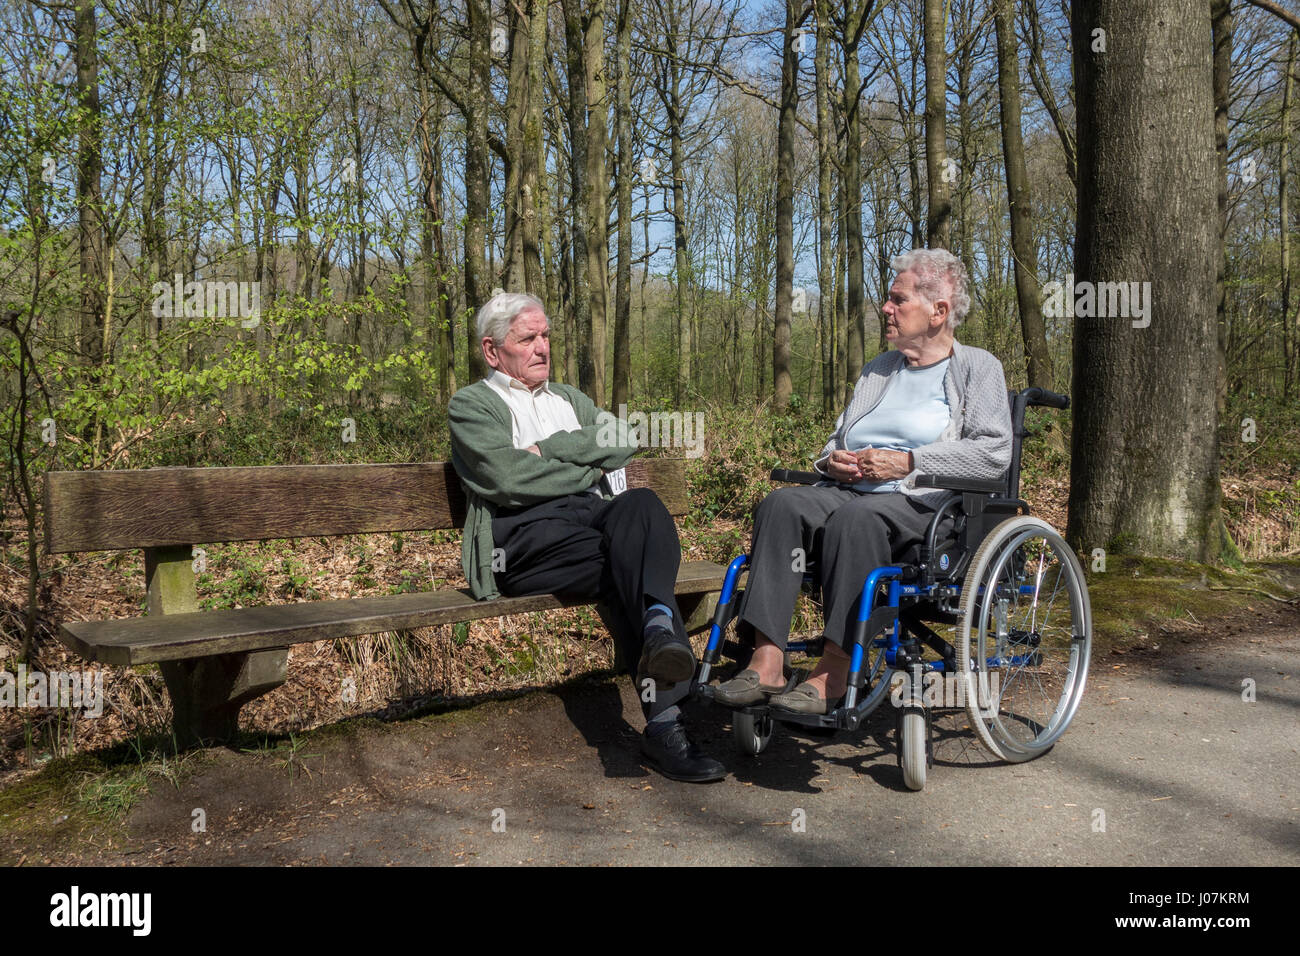 Disabled elderly woman in wheelchair talking to her retired husband sitting on a park bench during stroll in forest on a sunny day in spring Stock Photo